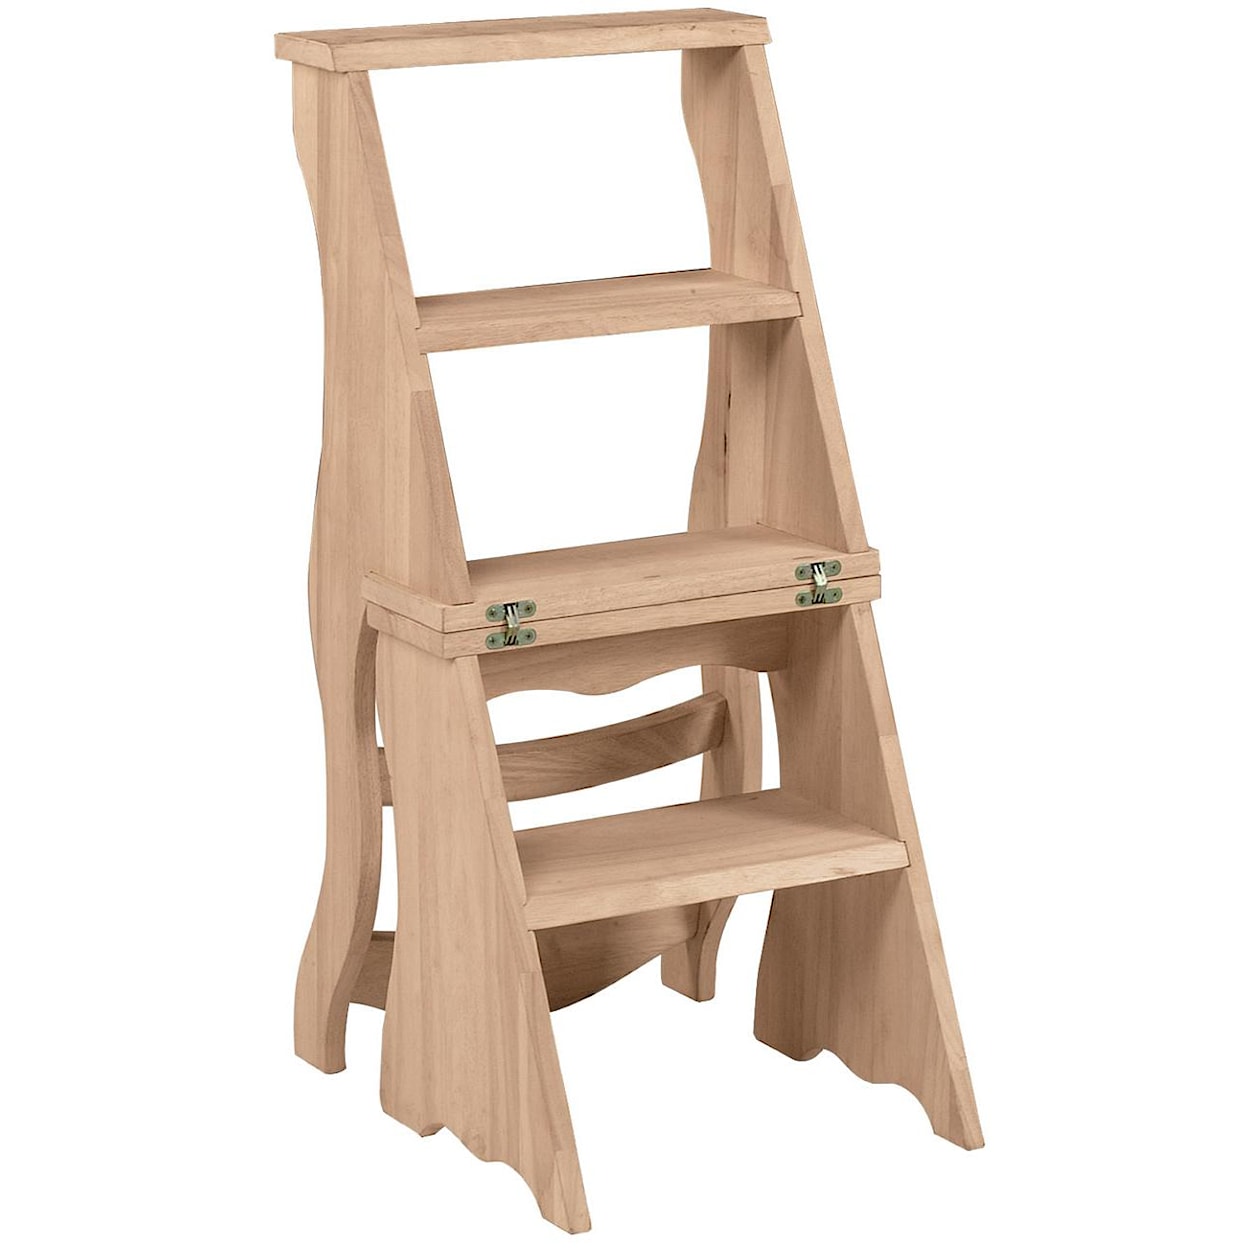 John Thomas SELECT Occasional & Accents Ladder Chair